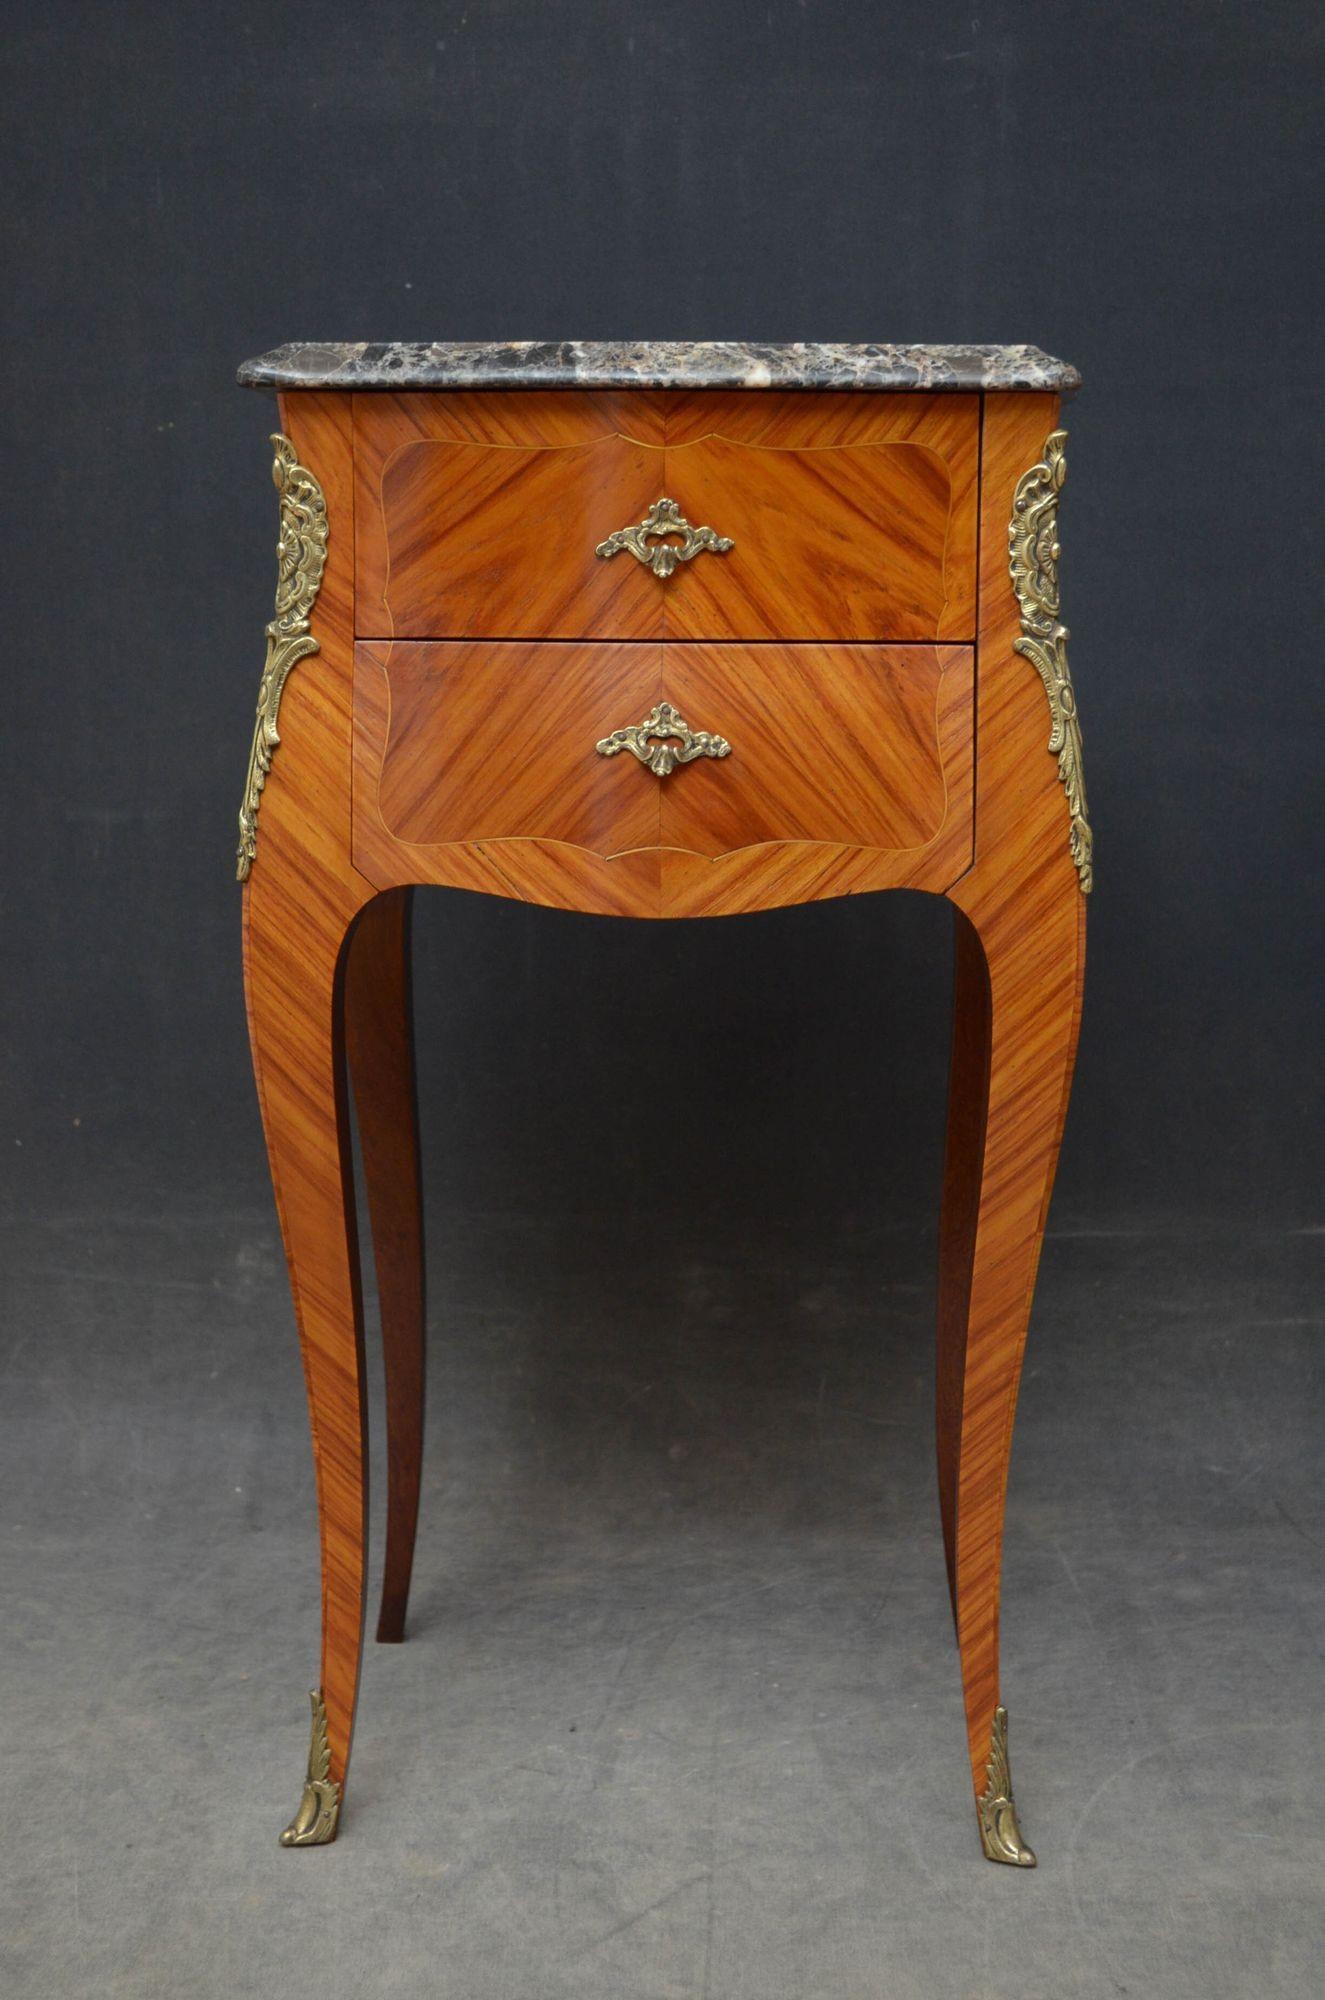 Sn5292 Pair of elegant kingwood bedside drawers, each having original serpentine marble top above two string inlaid drawers fitted with original handles and flanked by decorative ormolu, all standing on cabriole legs and sabots. This pair of bedside